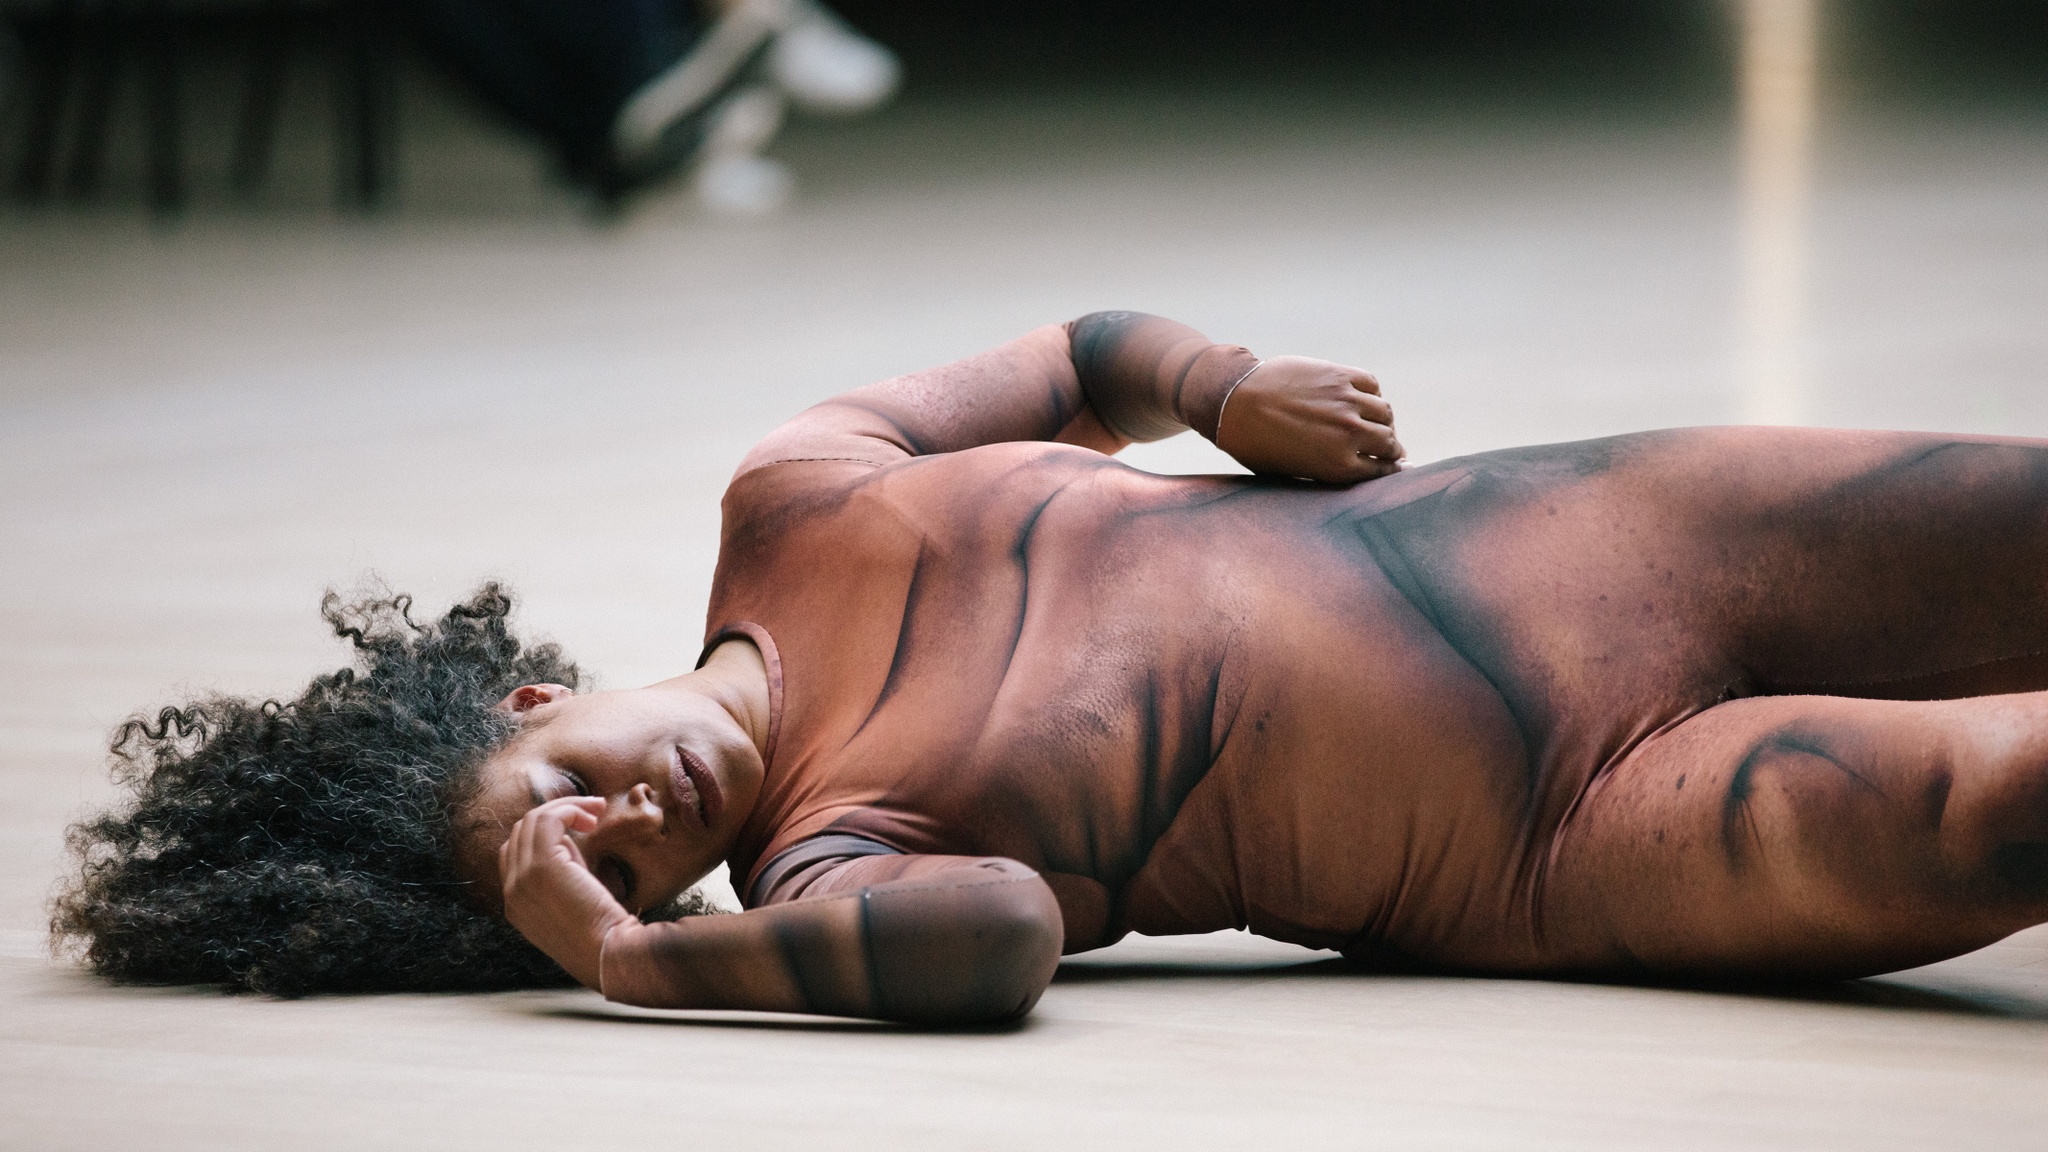 A dancer in a body suited printed with a light and dark brown design lies on the floor with one hand resting on her forehead